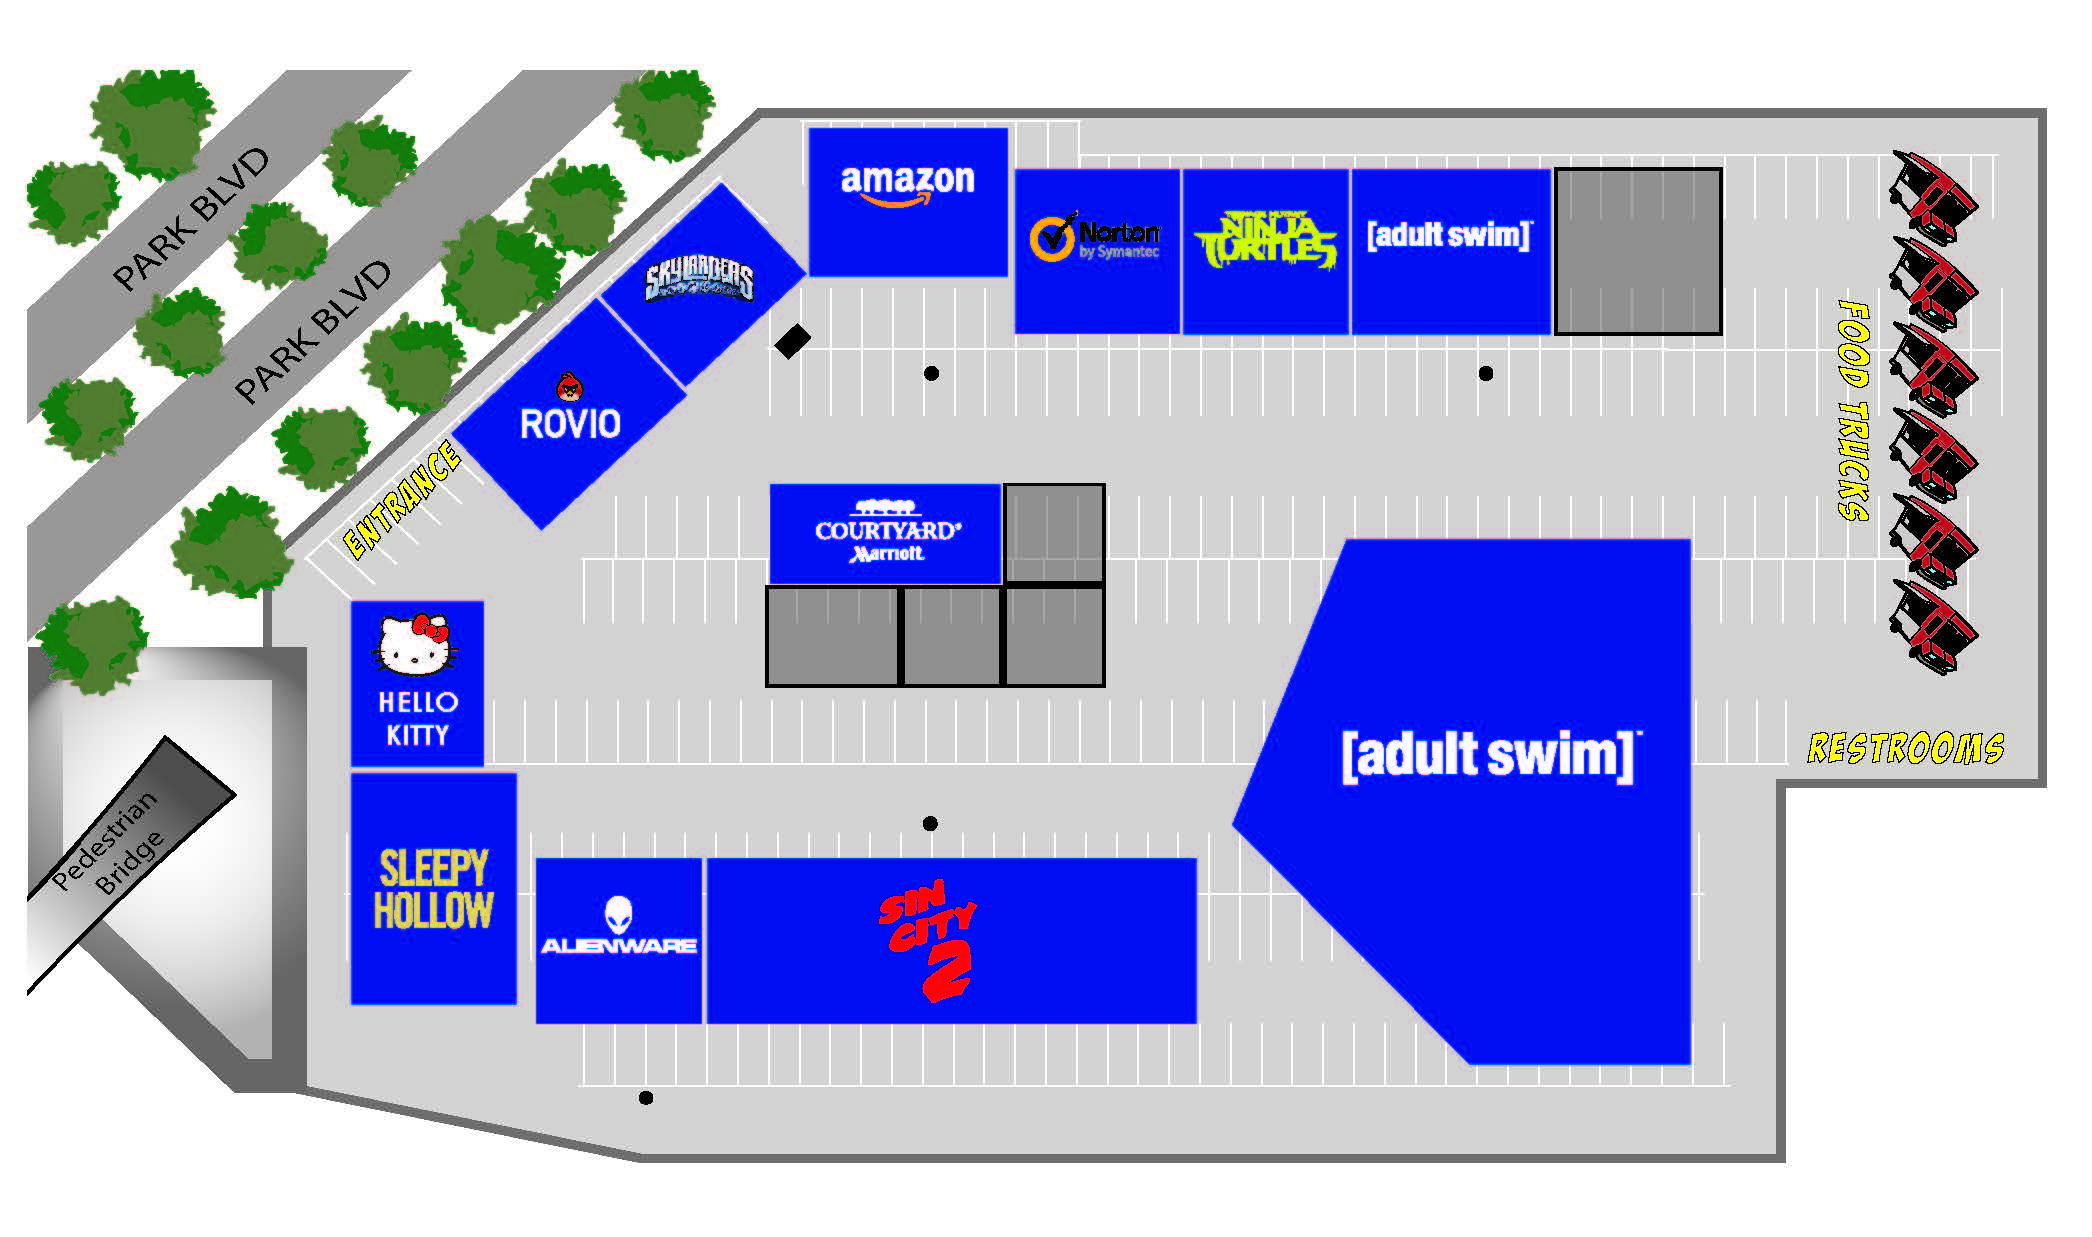 What You Can Expect at SDCC 2014 Petco Park Interactive Zone The